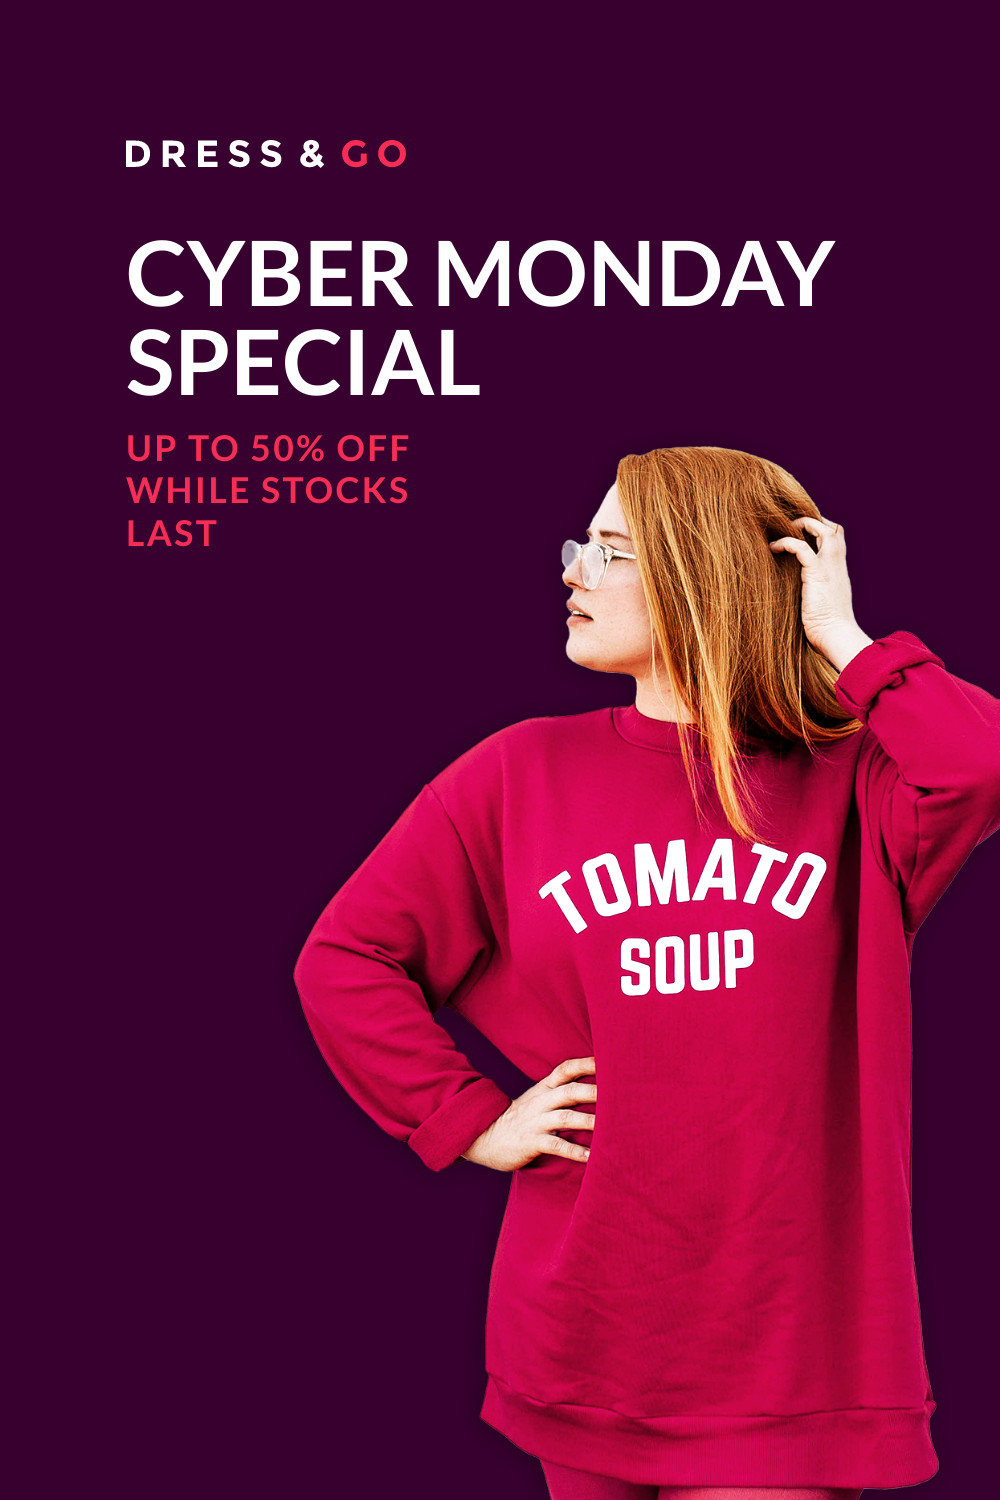 Cyber Monday Special Red Woman